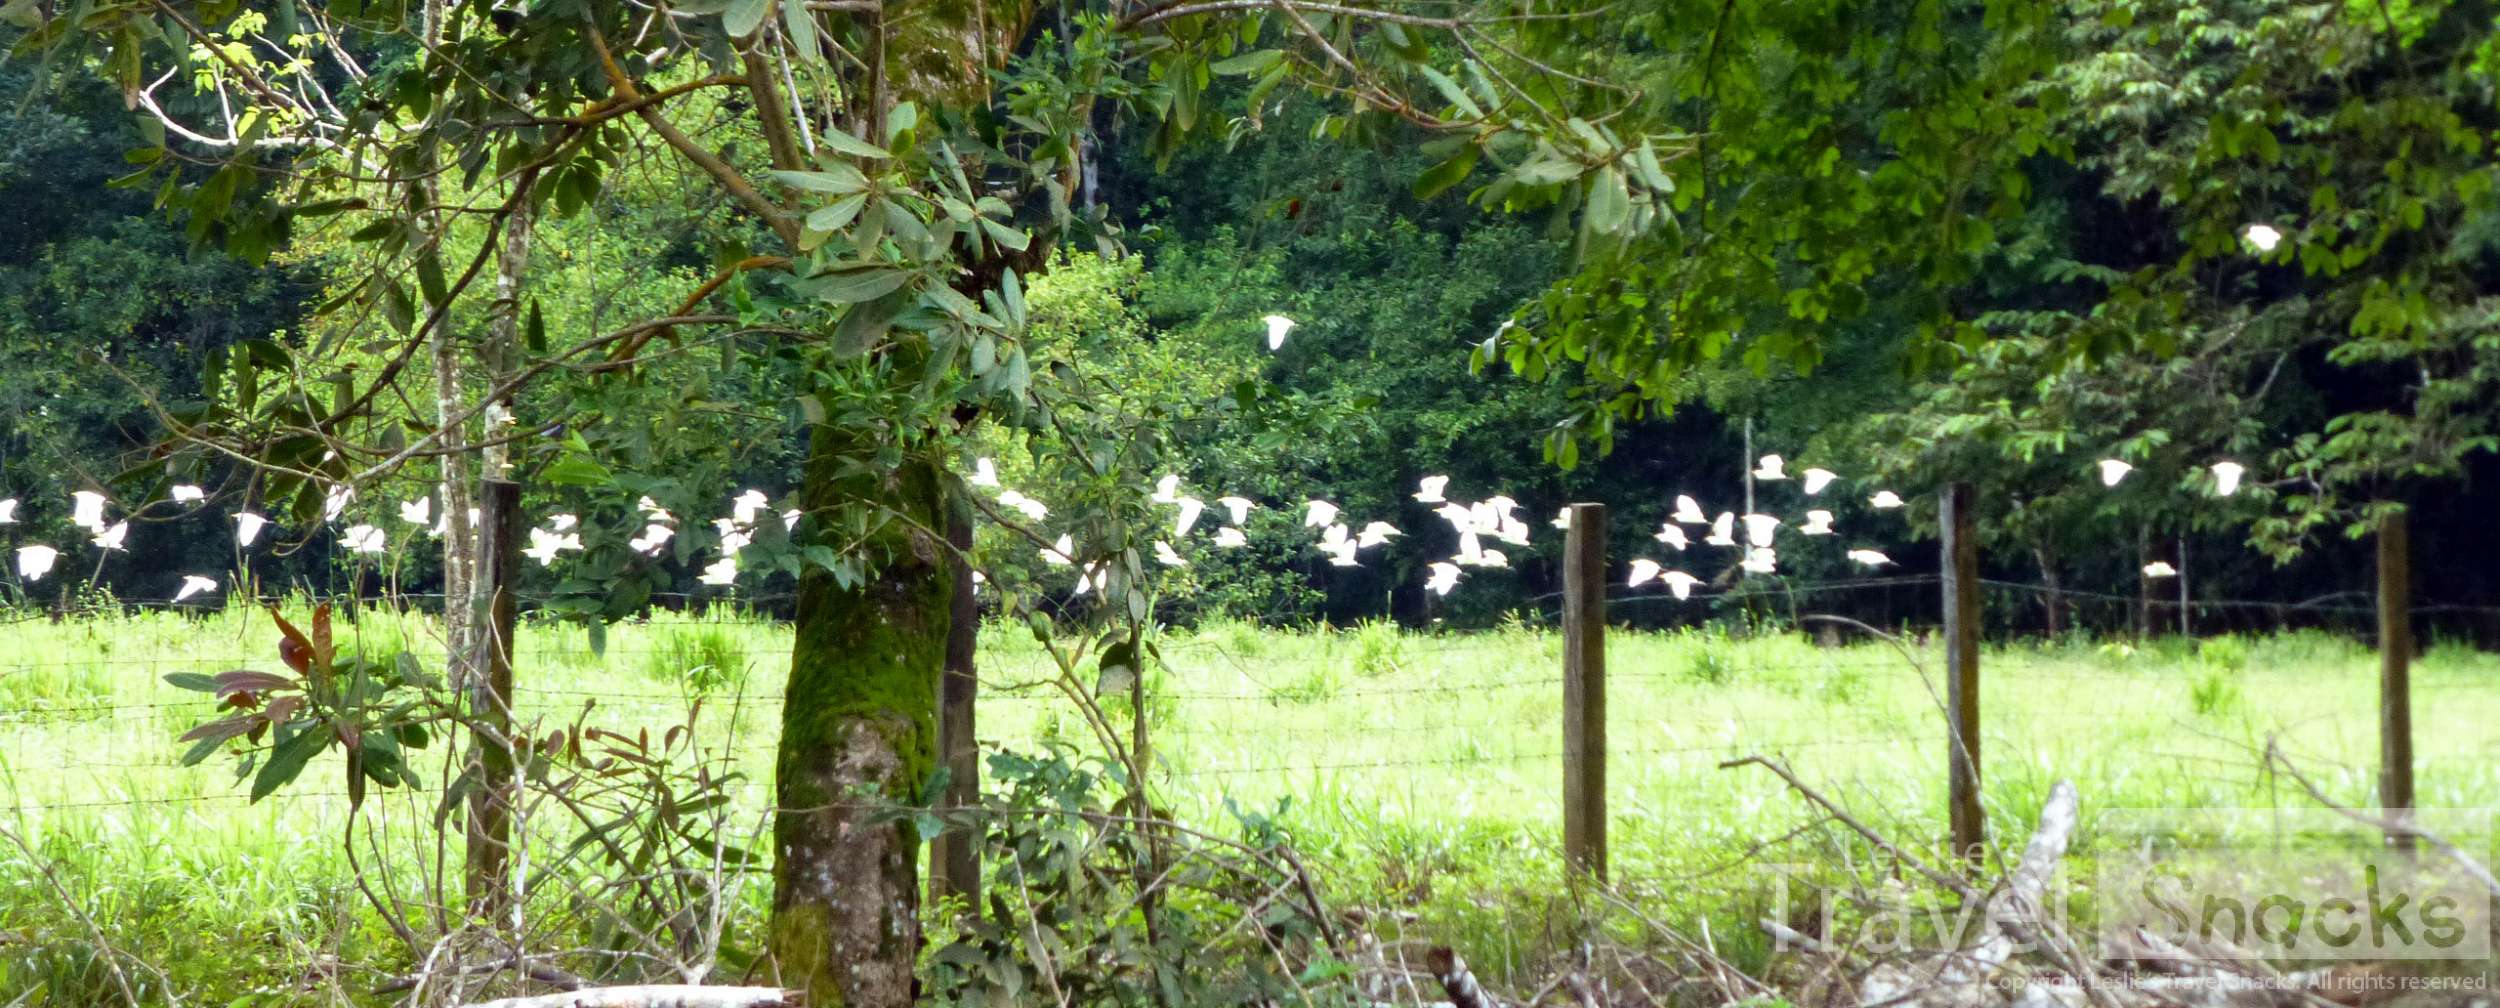 The best I could do, apparently. A blurry photo of the egrets. 